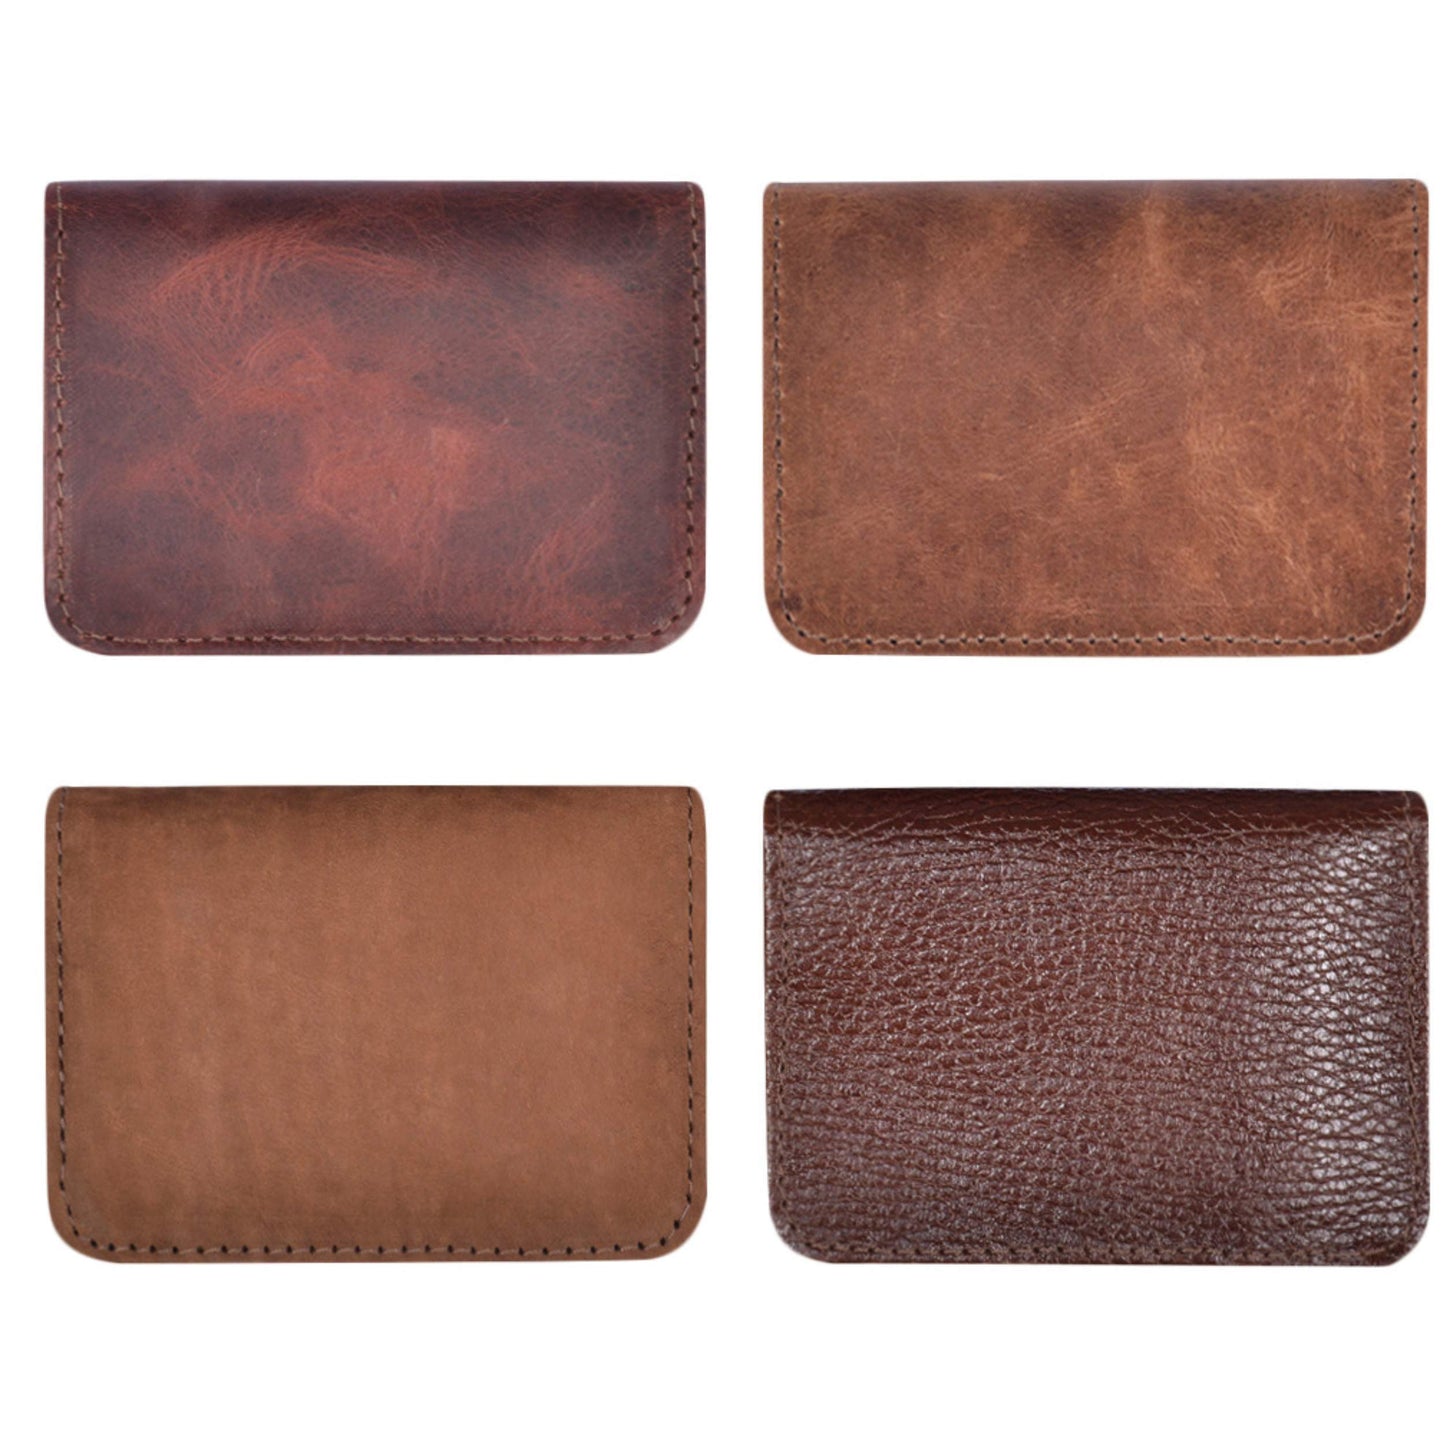 Mens Leather Wallet with Coin Pocket and ID Window